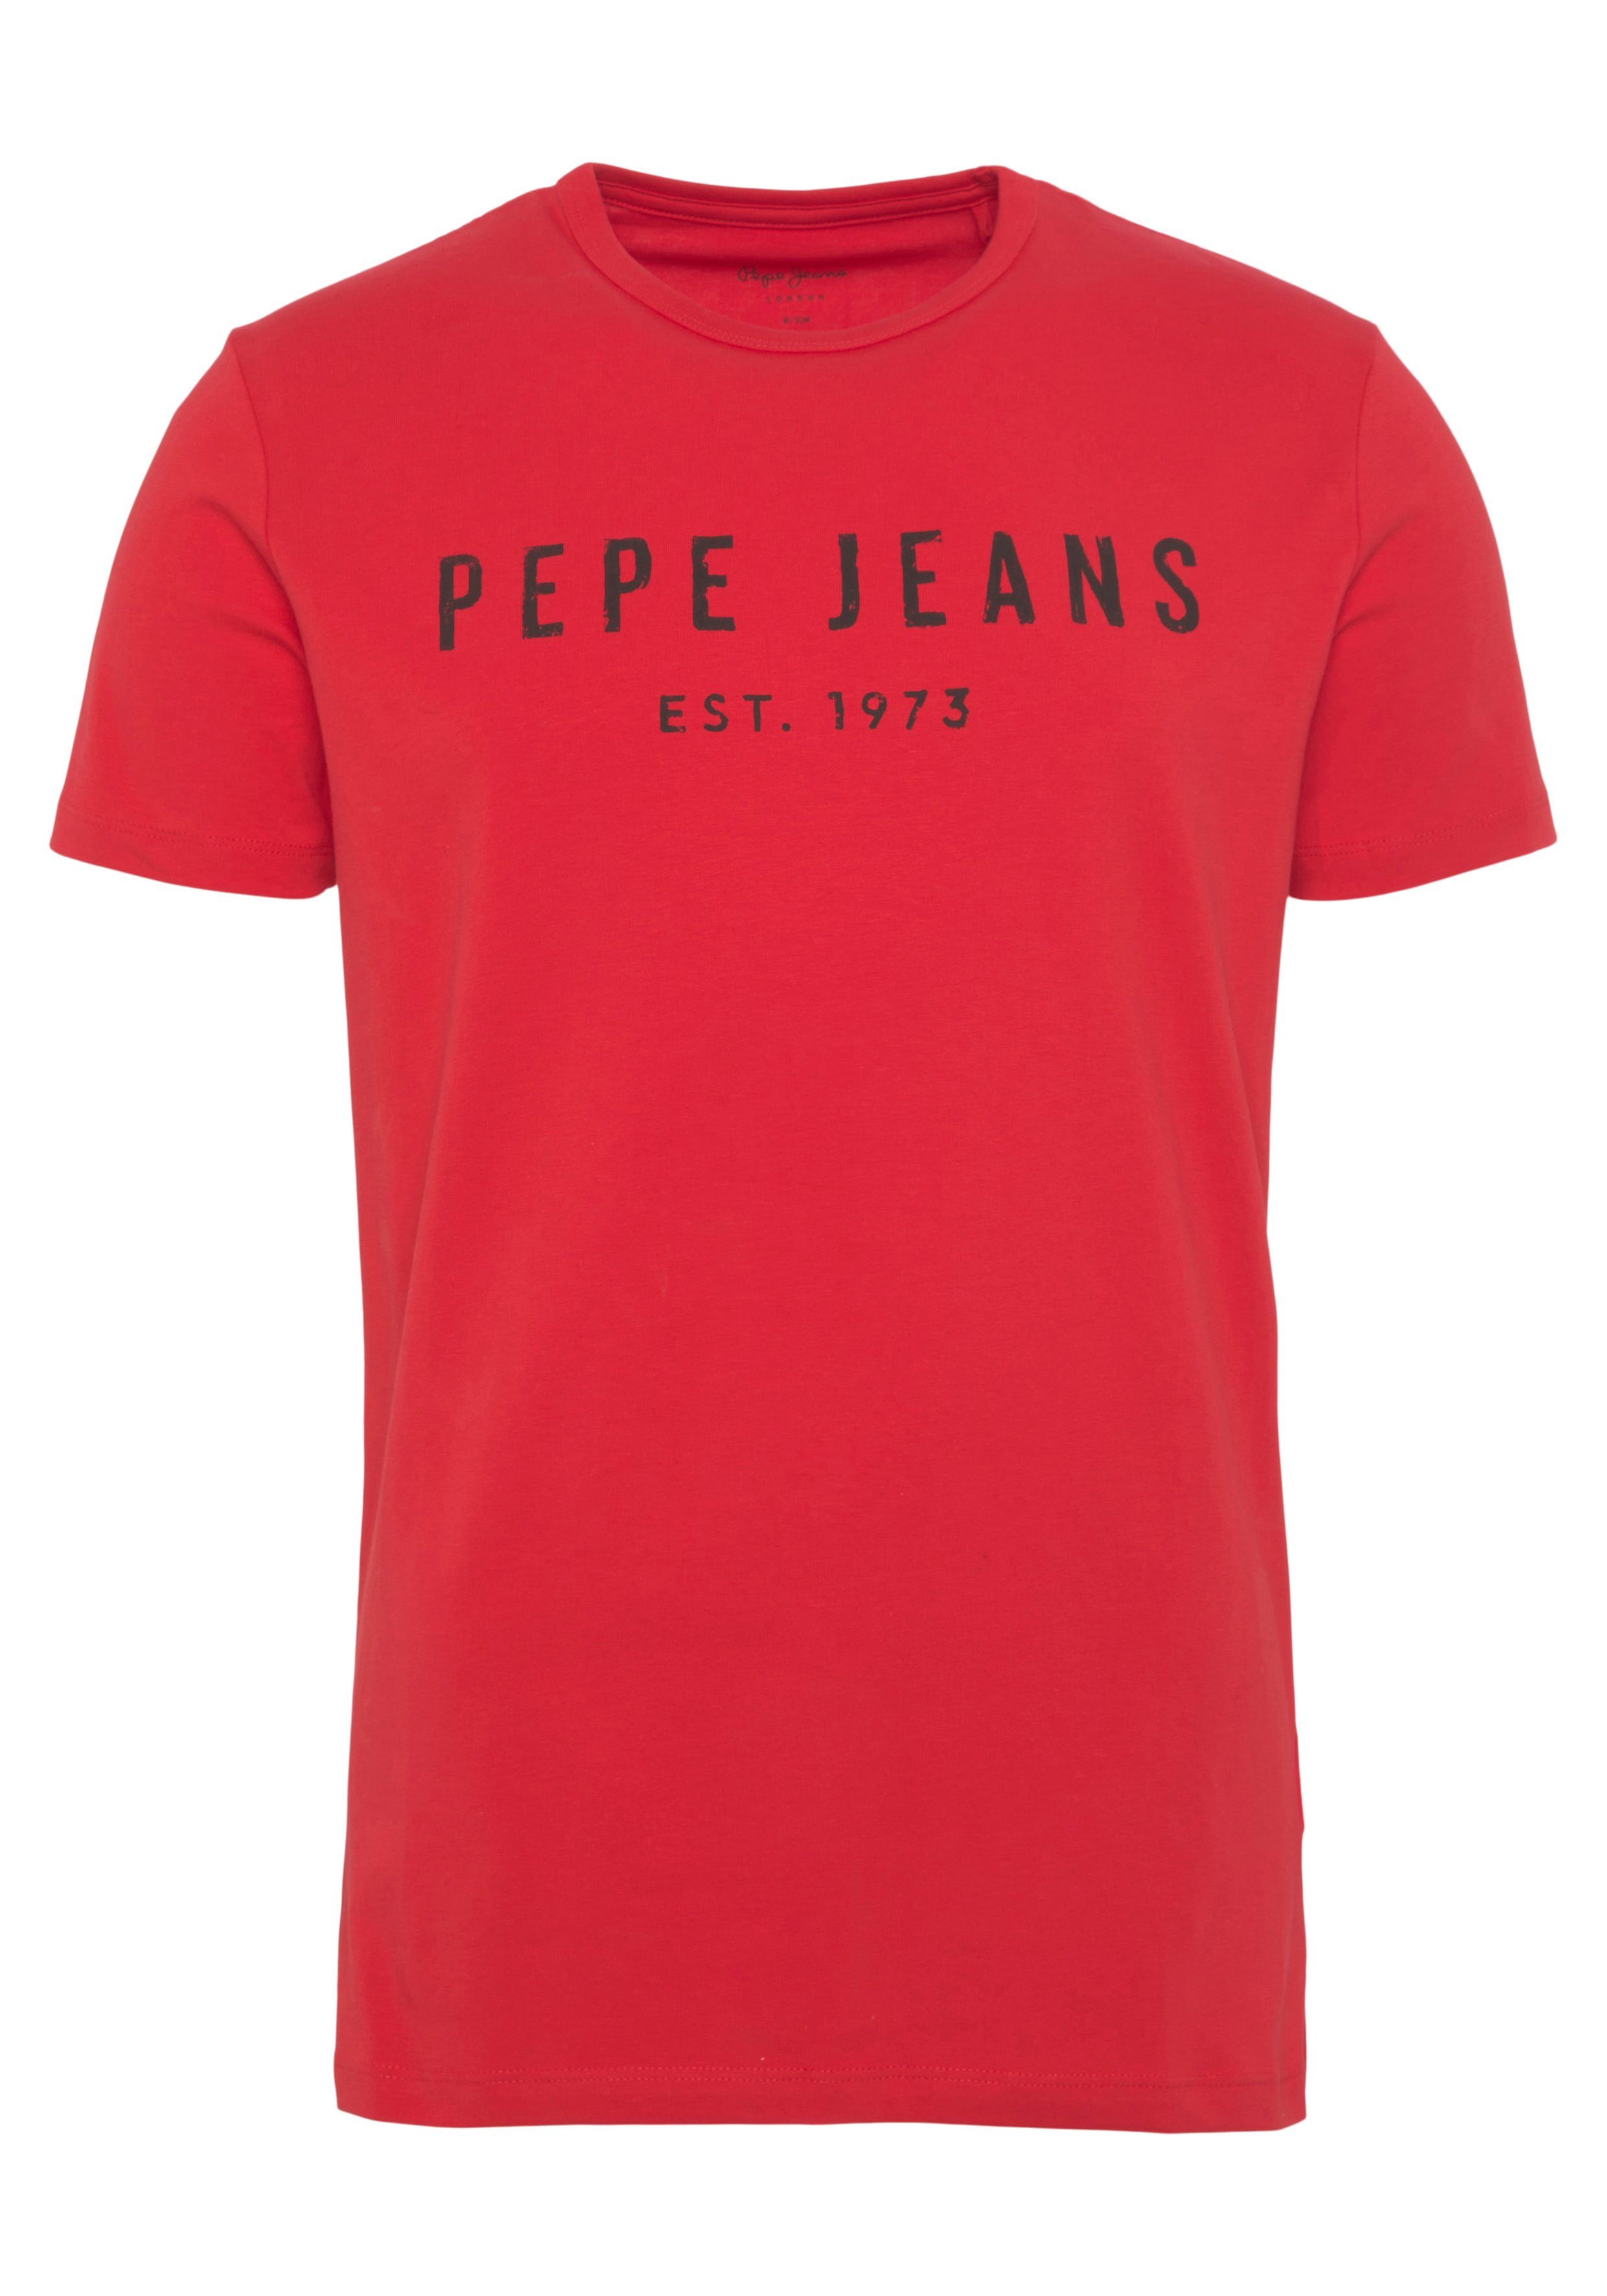 T-Shirt Pepe Jeans rot